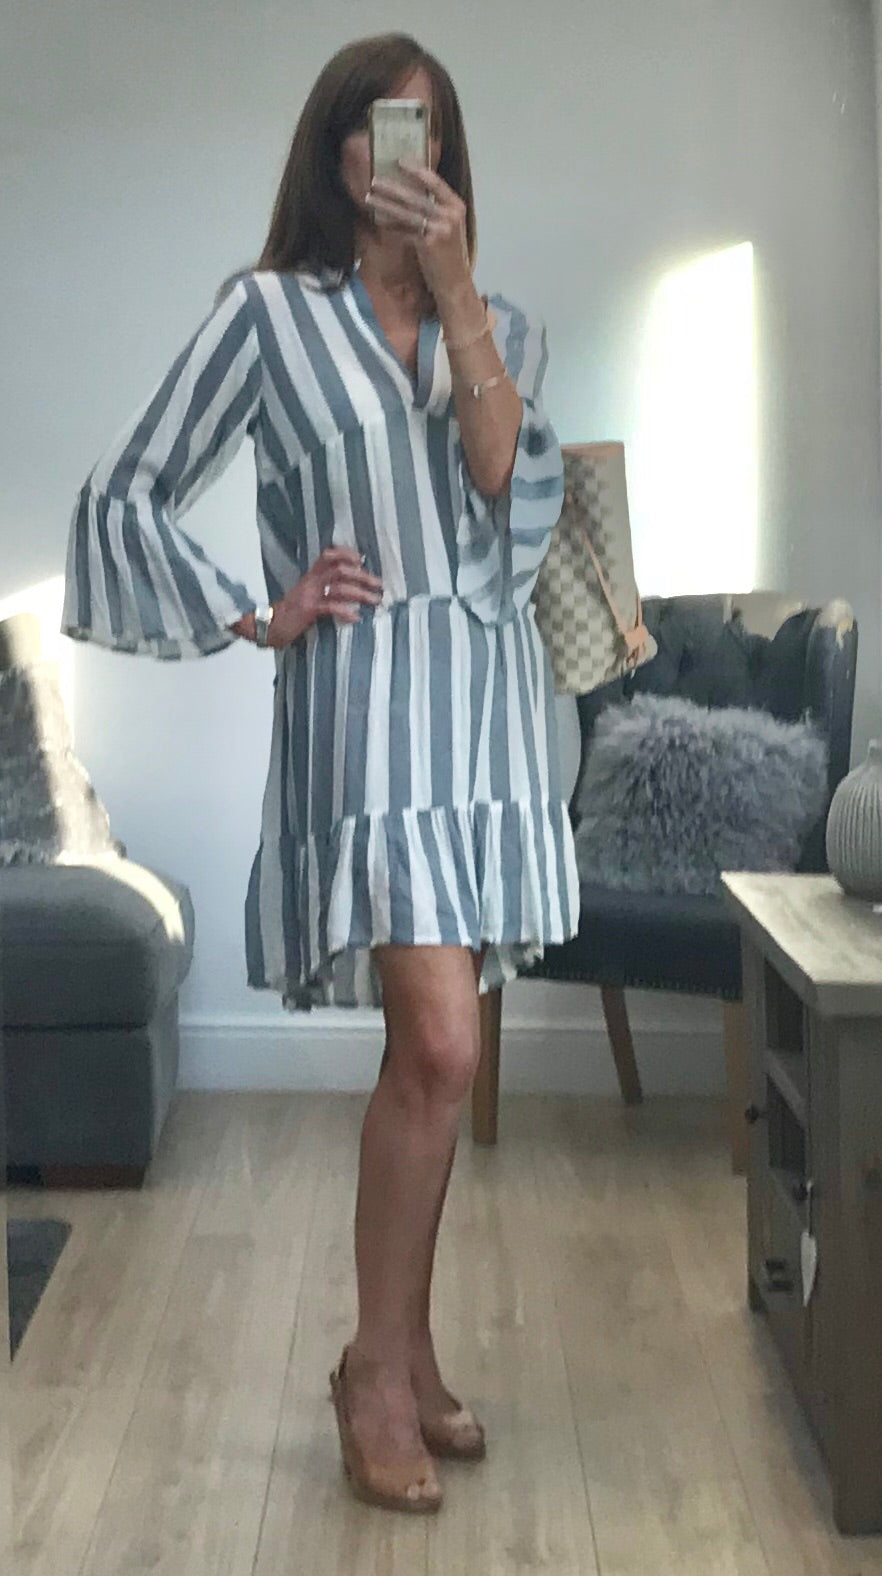 White and Blue Striped Tunic Dress